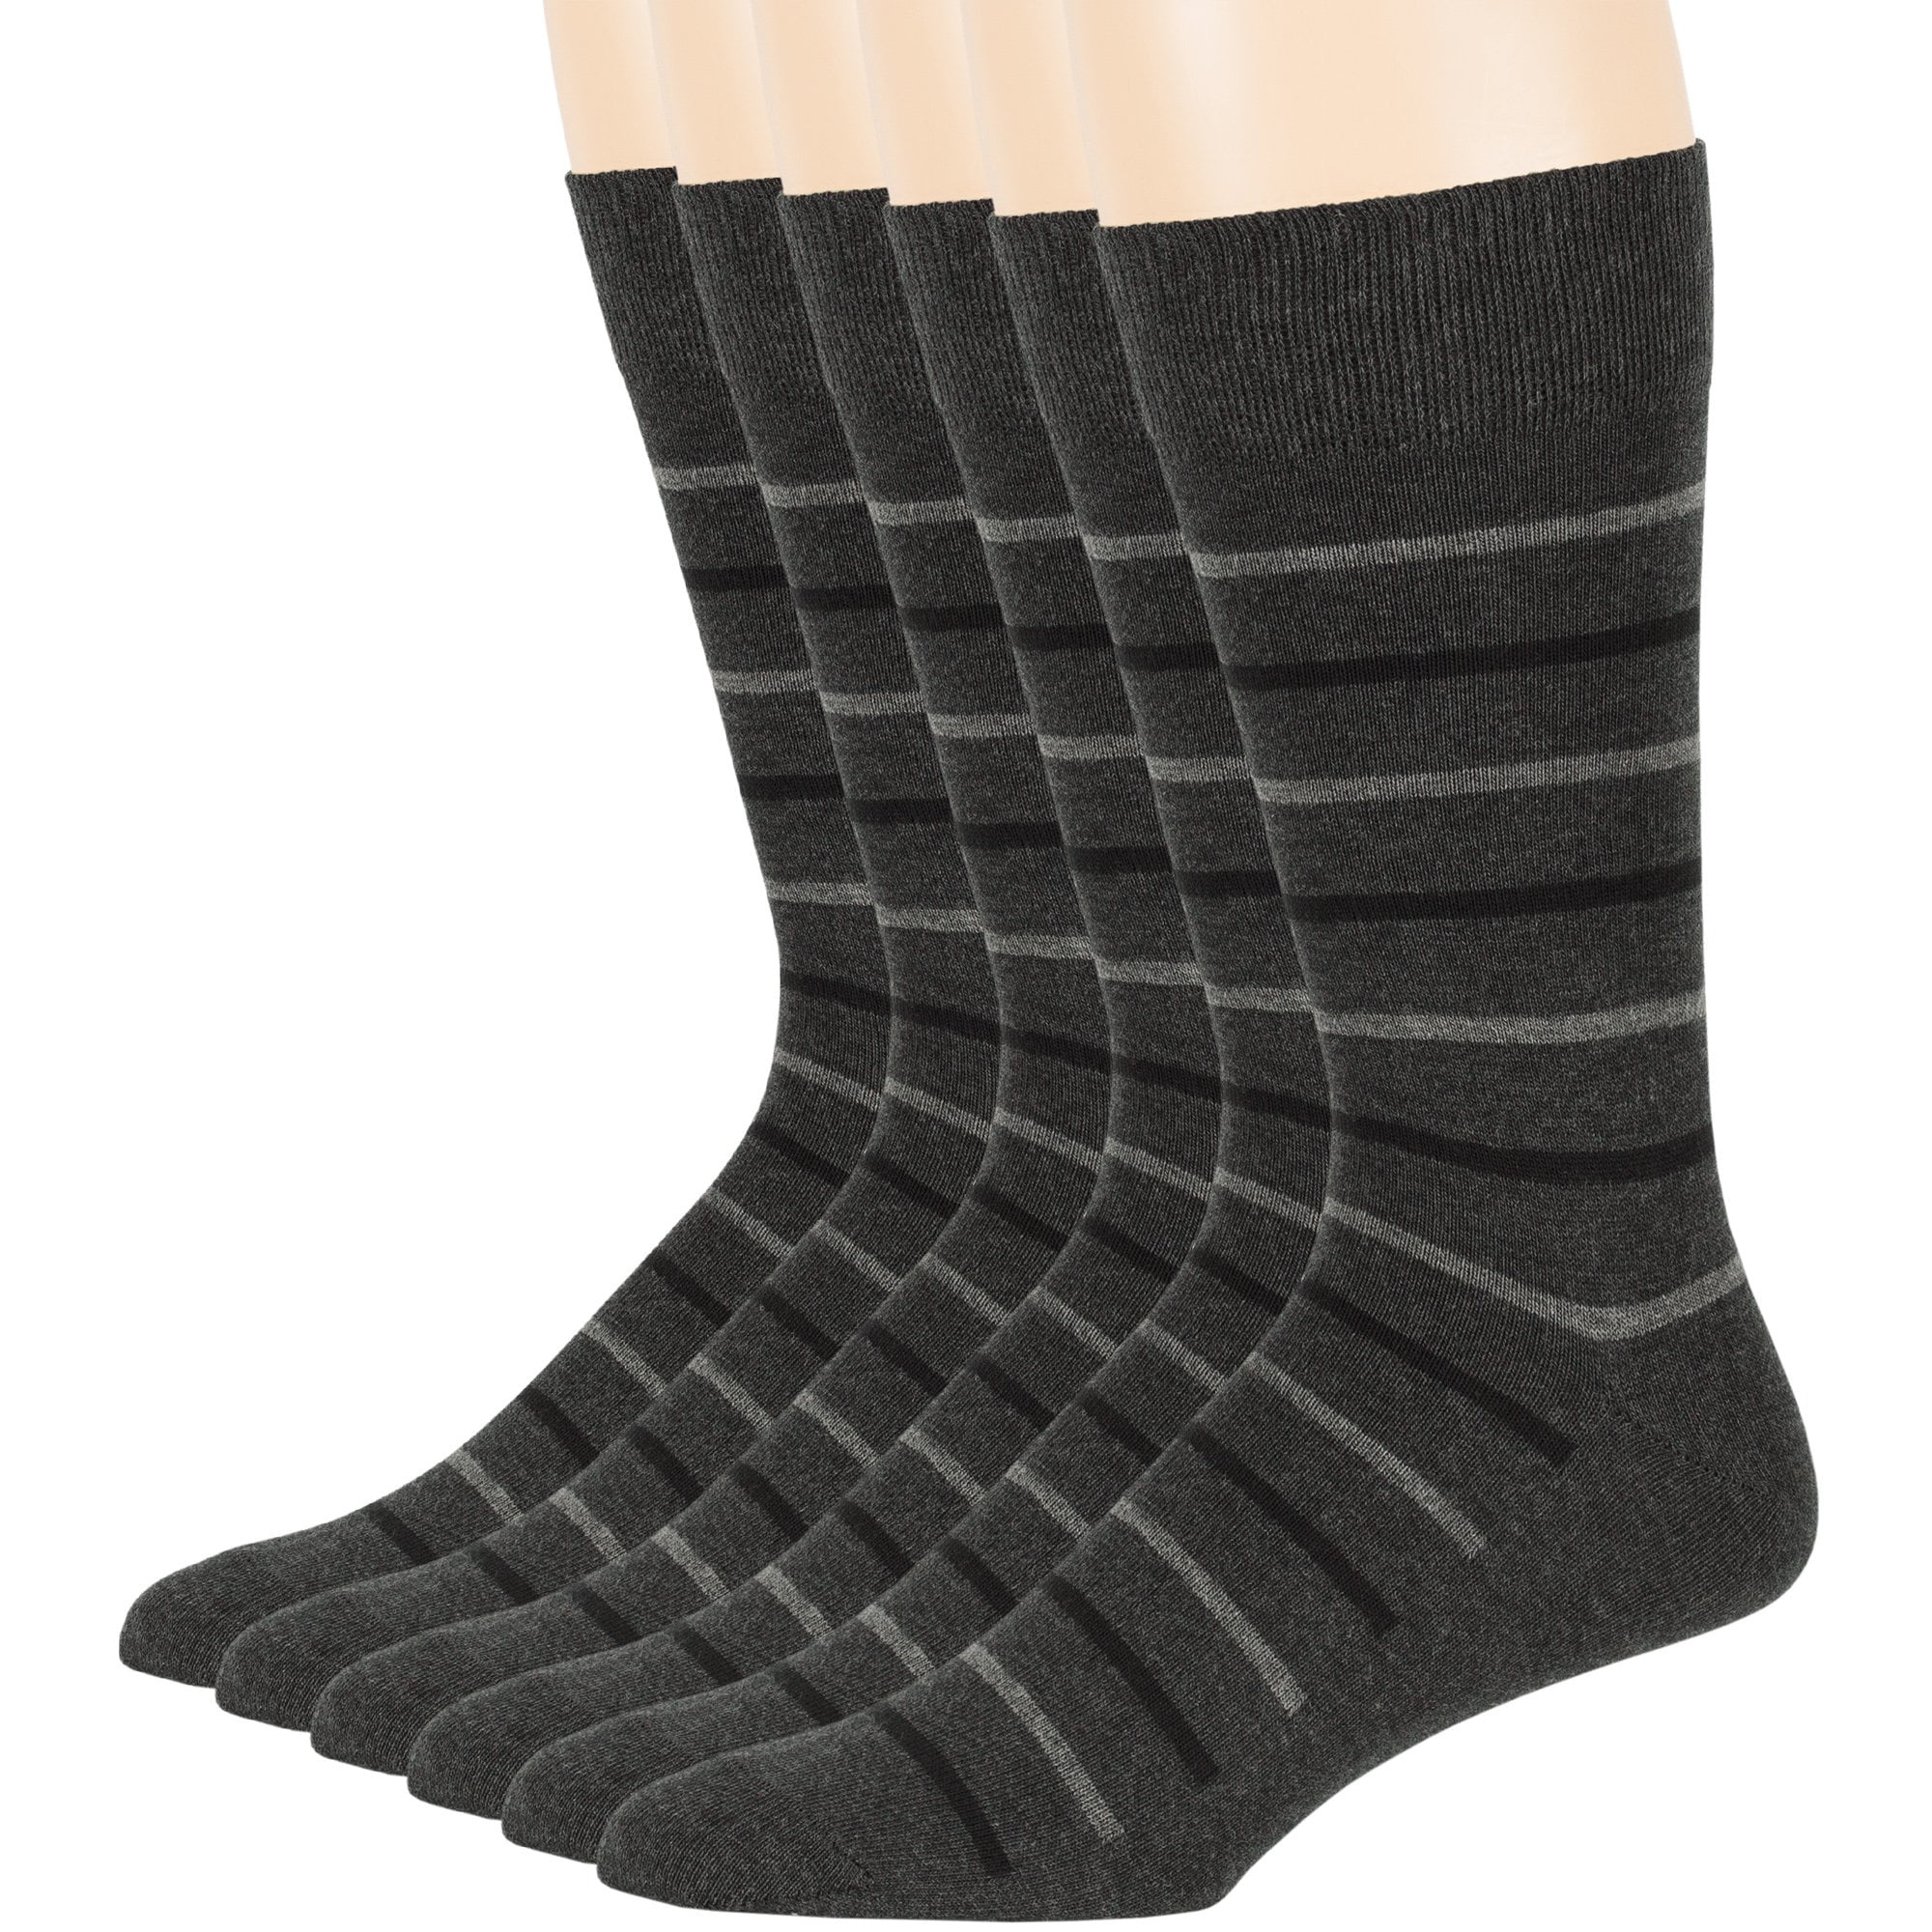 Mens Cotton Striped Daily Office Work Socks, Charcoal, Large 10-13, 6 ...